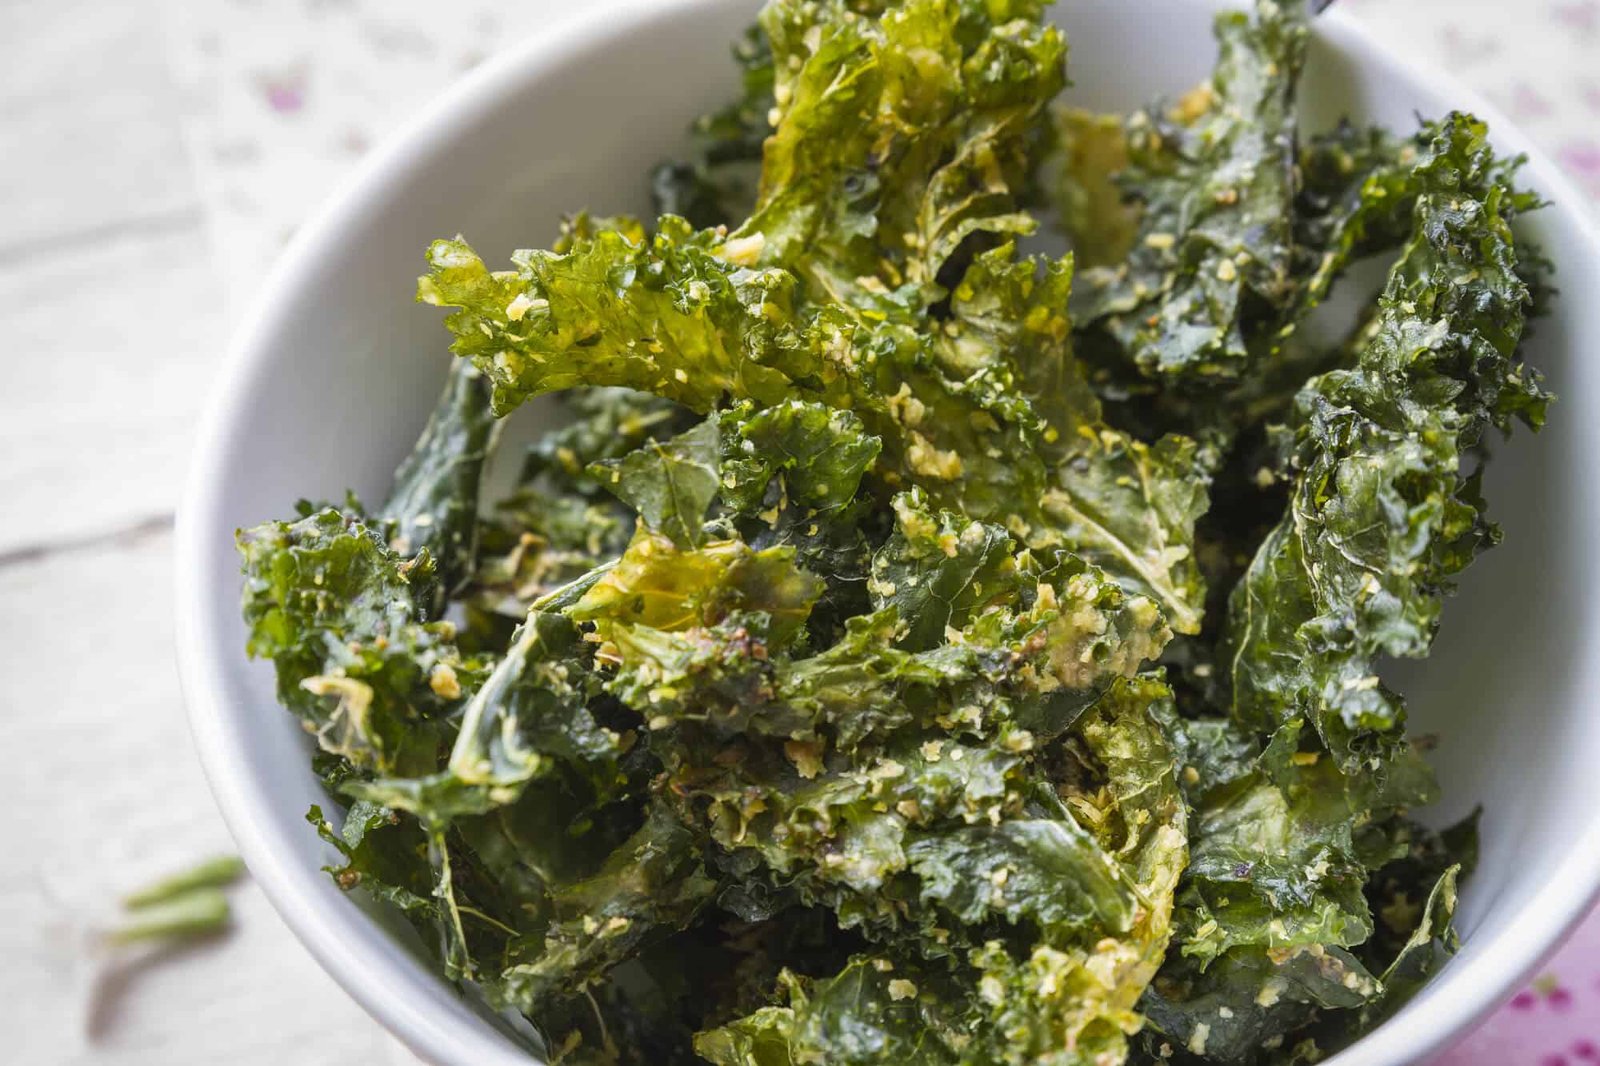 kale chips in a ceramic bowl on a backdrop of wooden table